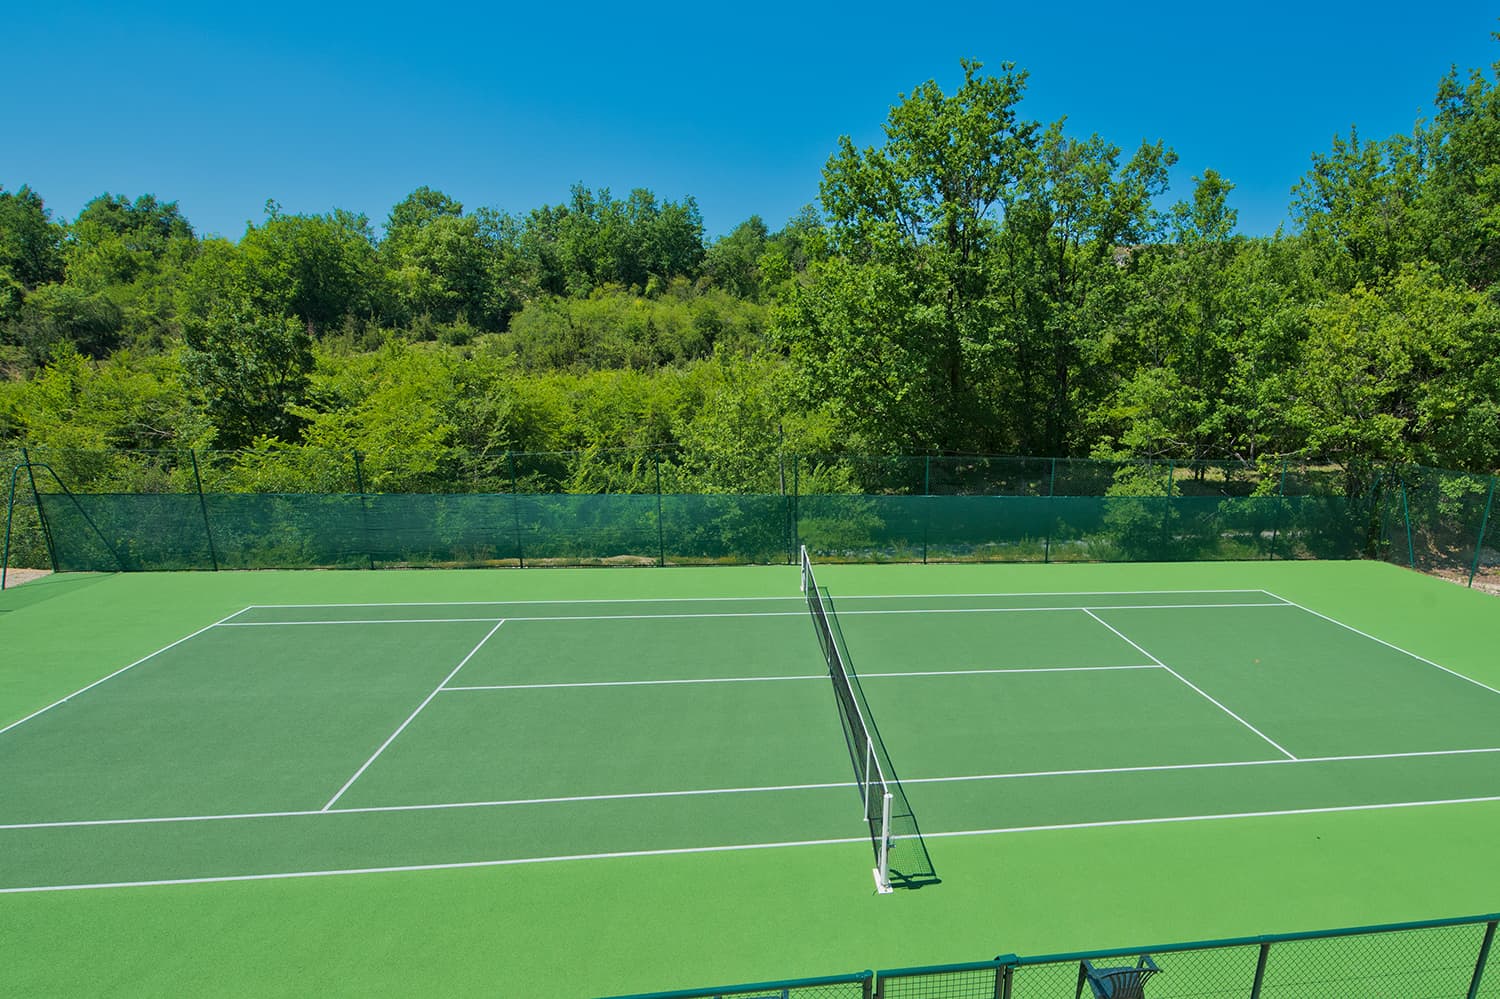 Holiday home in France with private tennis court